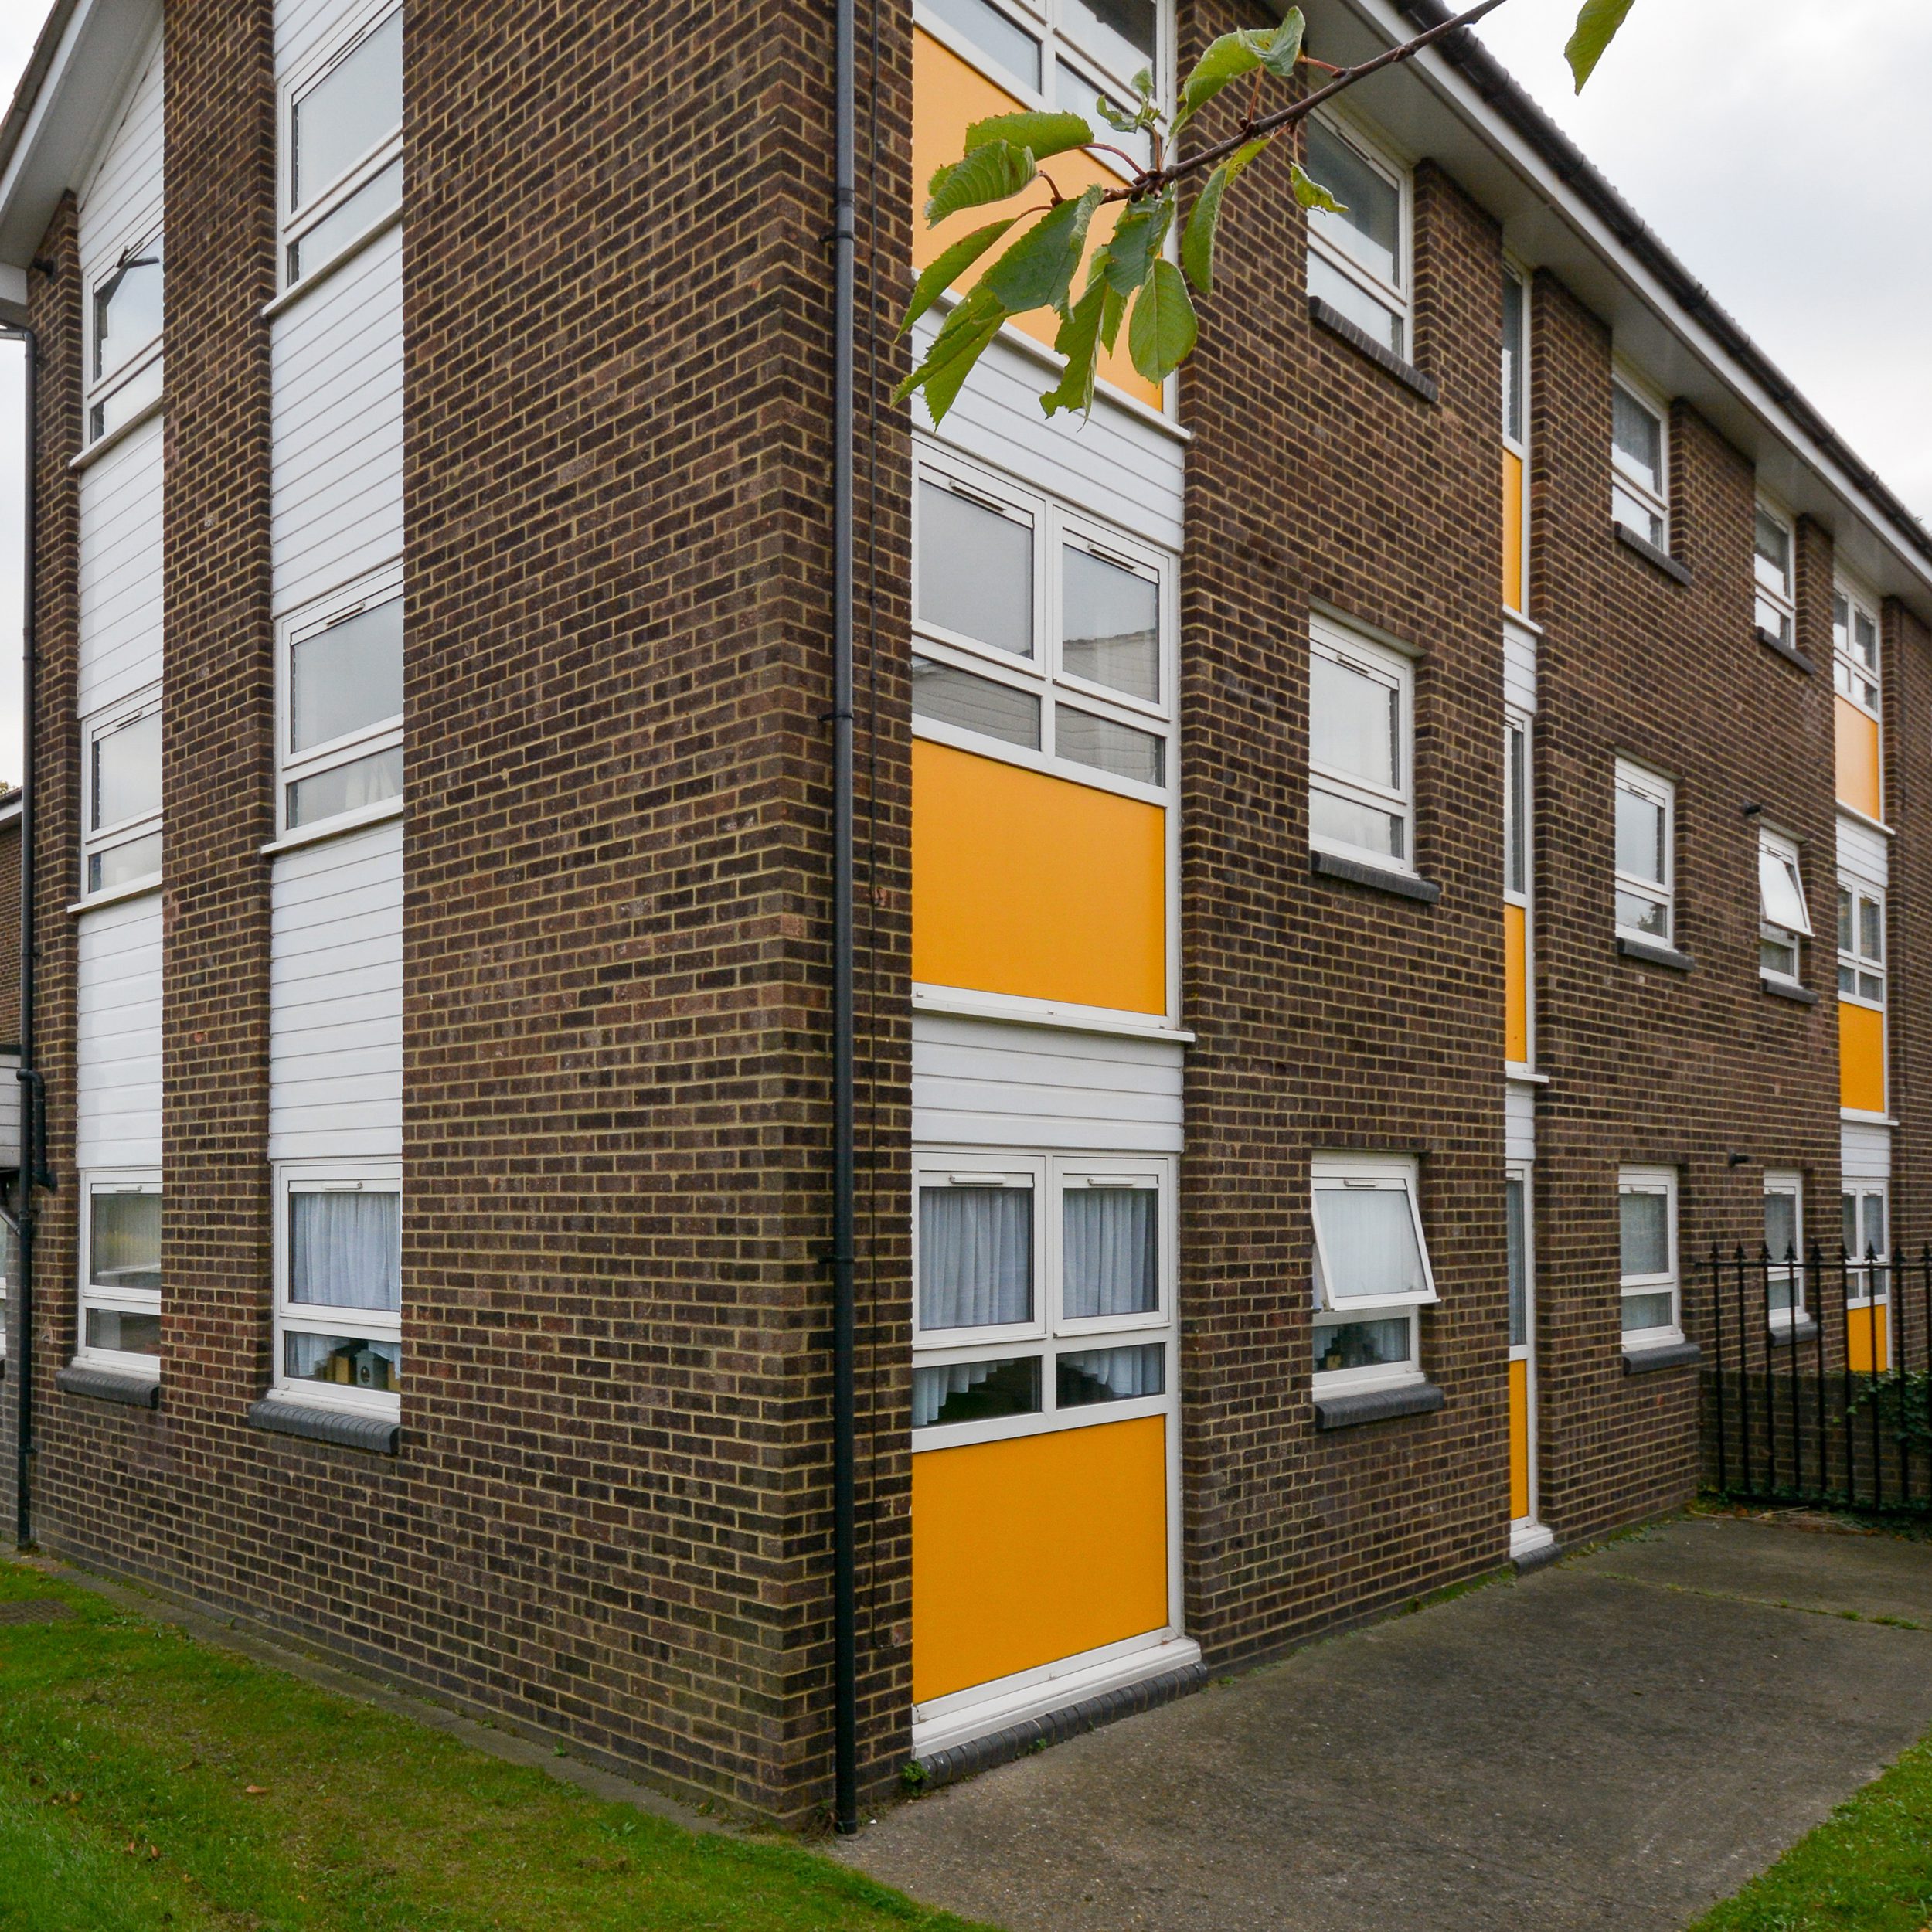 Light orange panels below windows on a housing property shows the finished works after repairs